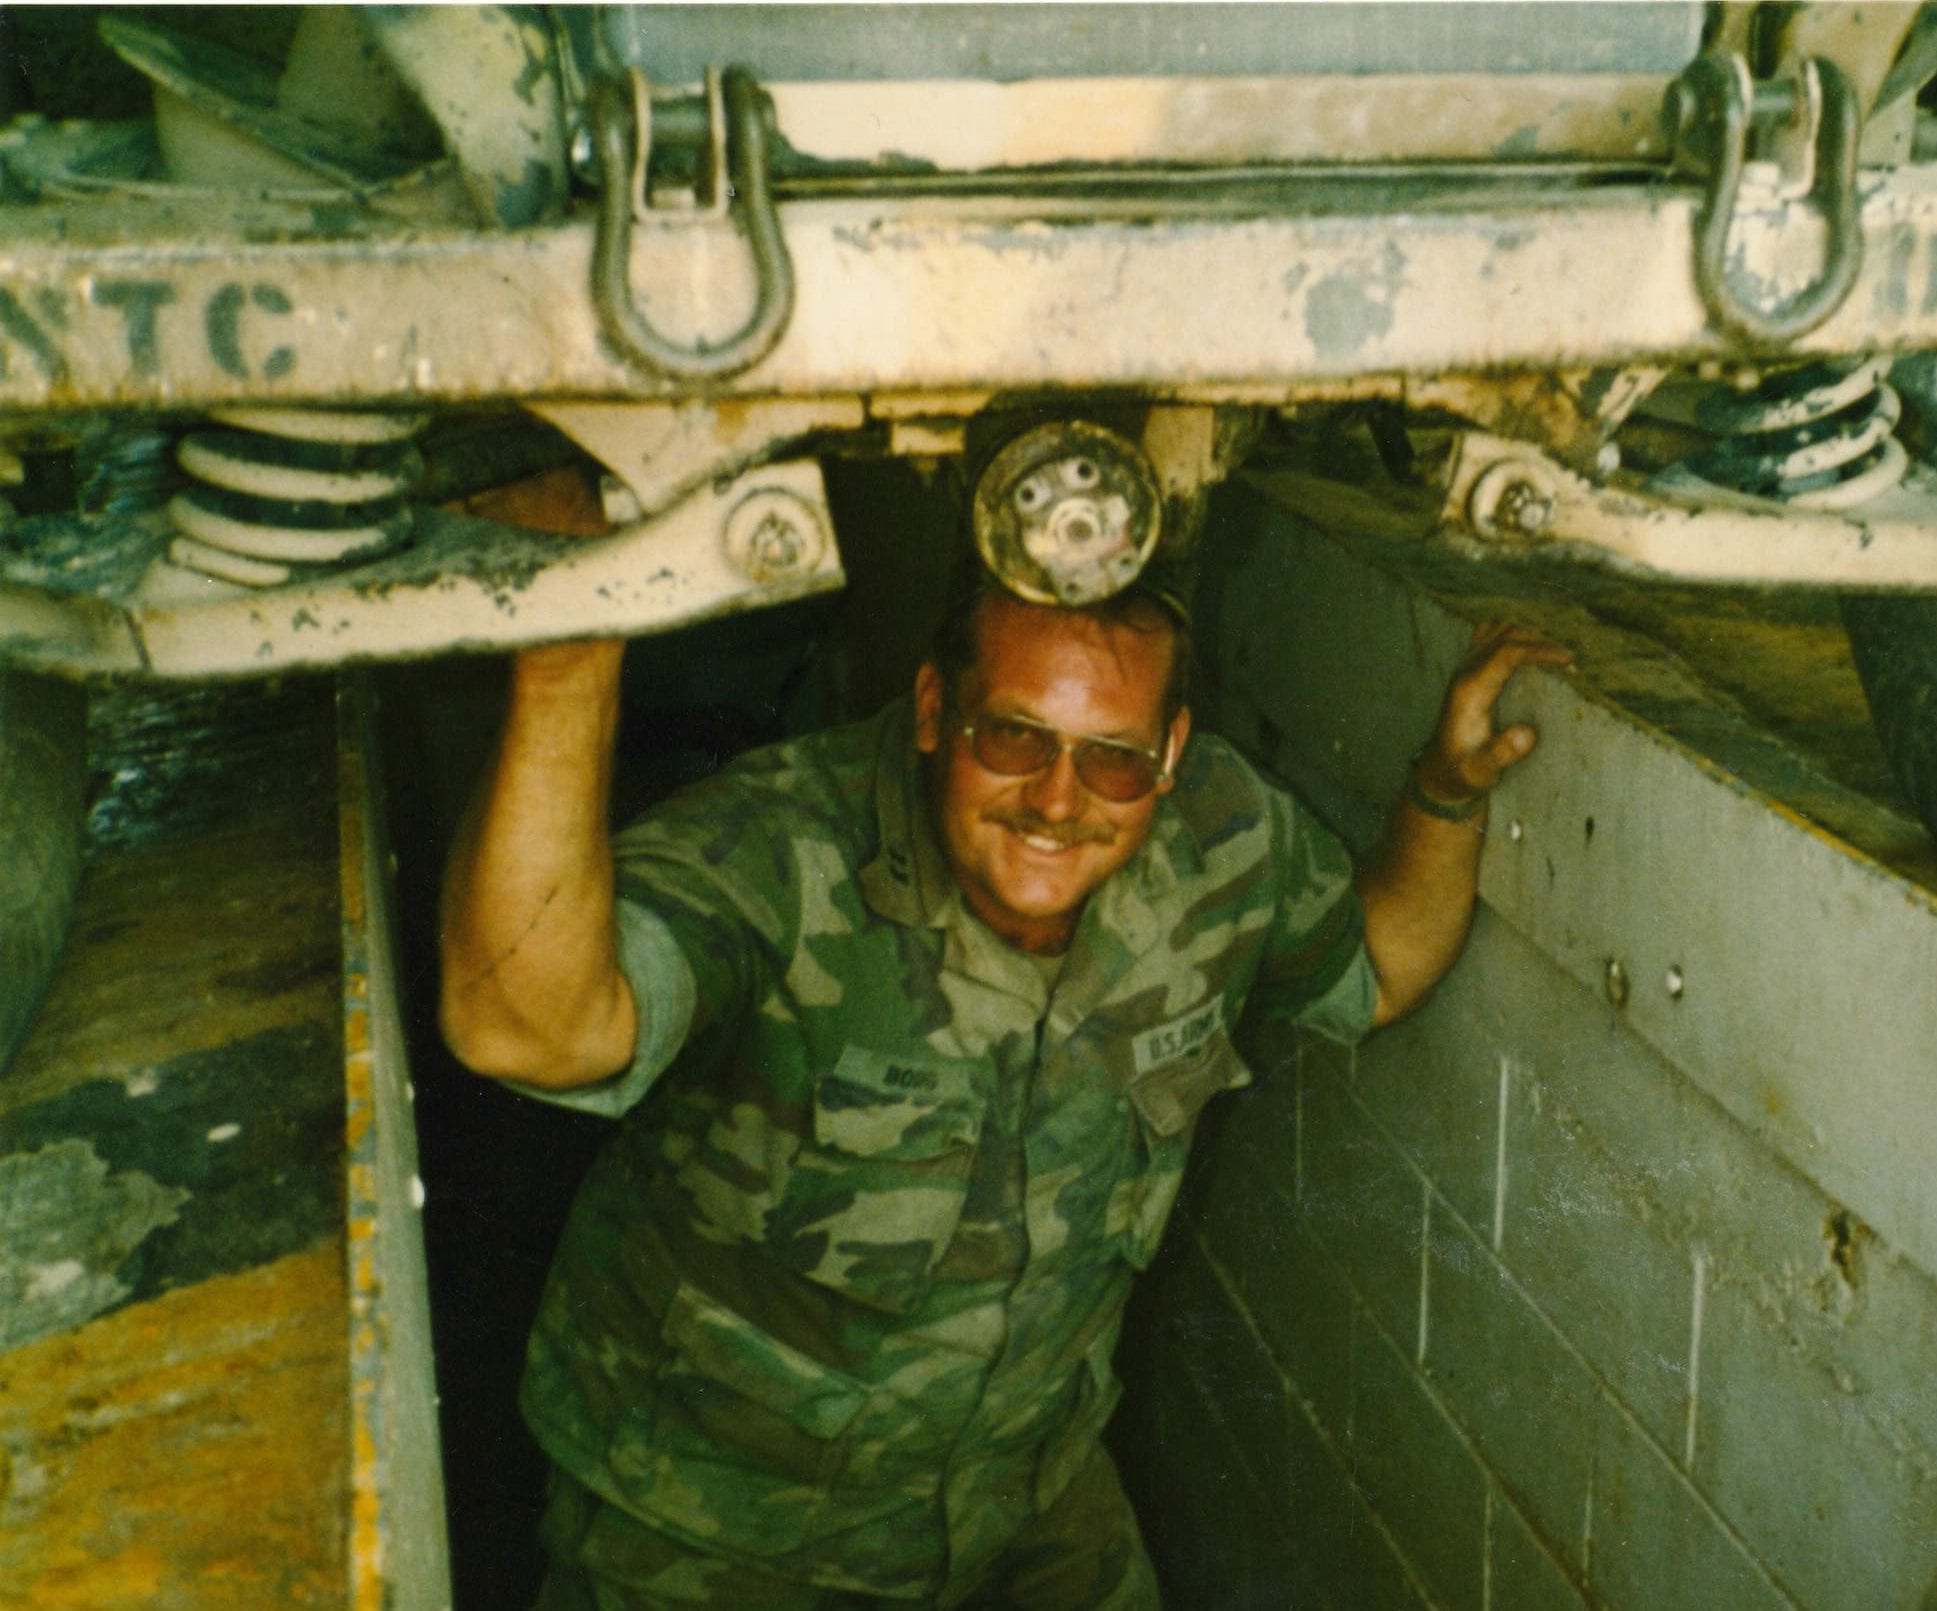 Axel Borg inspects the bottom of his jeep at the Army National Training Center in 1982.